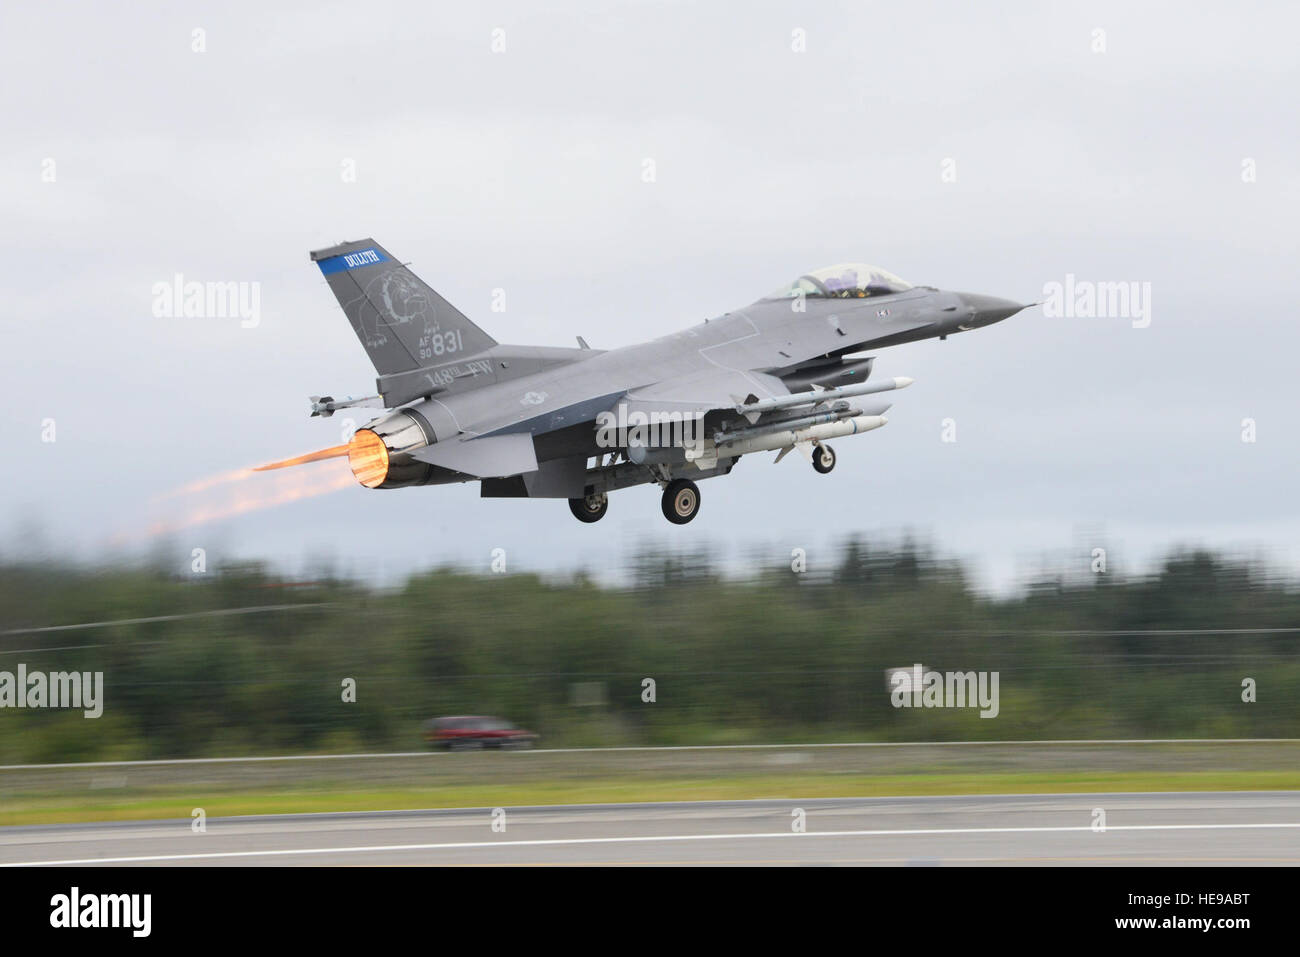 A U.S. Air Force F-16 Fighting Falcon assigned to the 179th Fighter Squadron, Duluth Air National Guard, Minn., takes off from Eielson Air Force Base, Alaska, Aug. 10, 2015, during Red Flag-Alaska (RF-A) 15-3. RF-A is a series of Pacific Air Forces commander-directed field training exercises for U.S. and partner nation forces, providing combined offensive counter-air, interdiction, close air support and large force employment training in a simulated combat environment.  Senior Airman Ashley Nicole Taylor Stock Photo